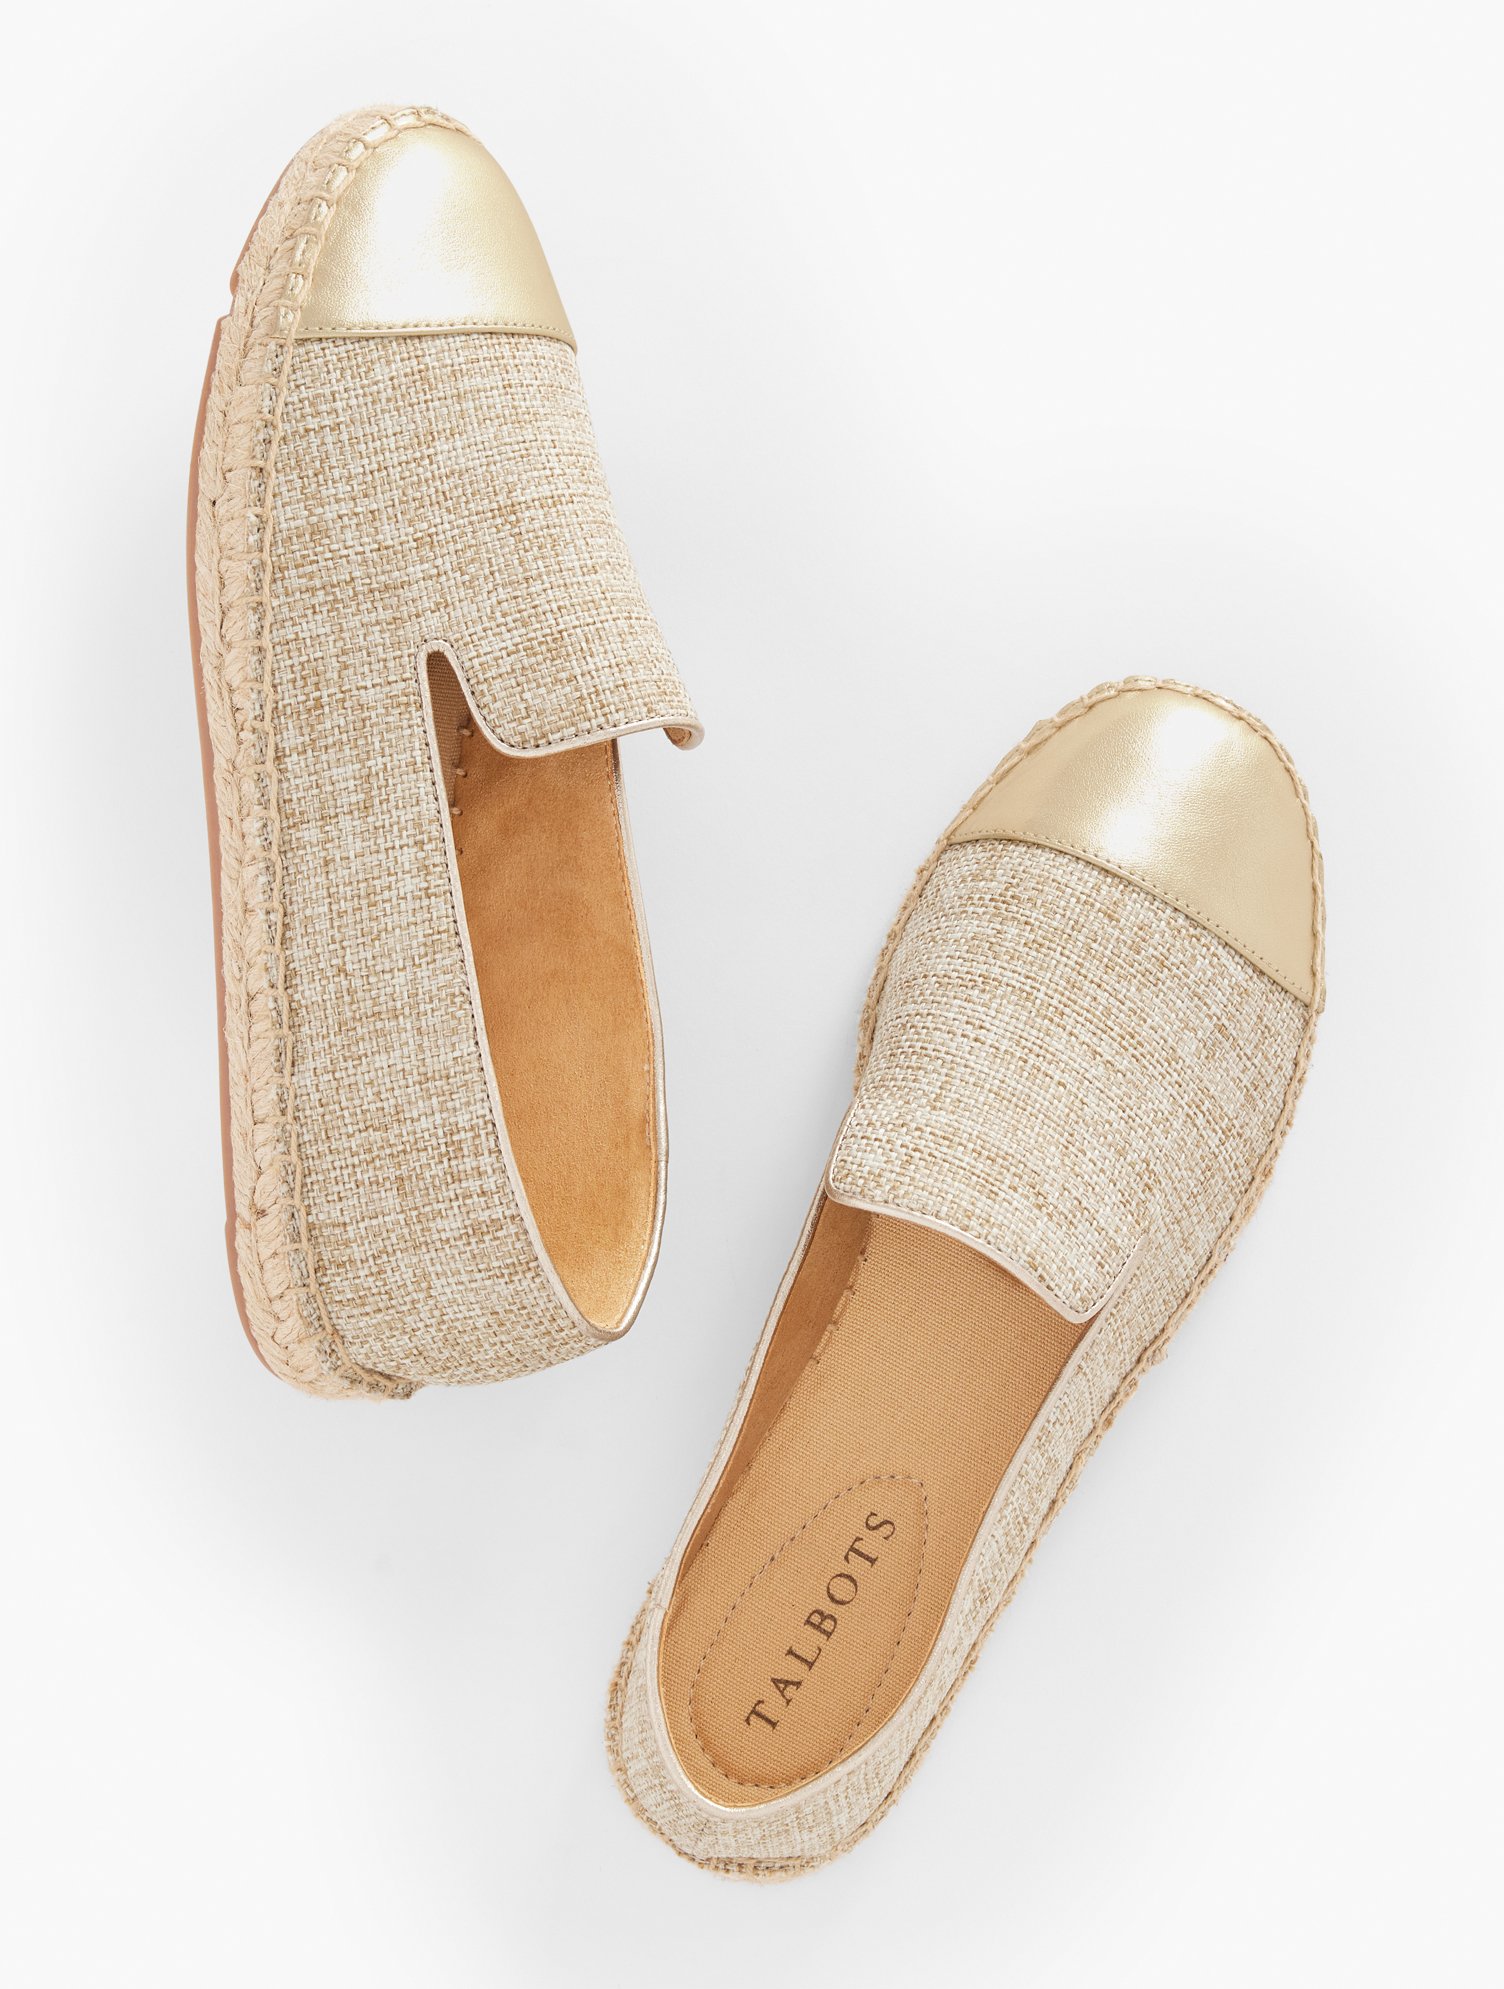 Talbots Izzy Espadrille Flats - Linen - Natural/gold - 7 1/2 M - 100% Cotton  In Natural,gold